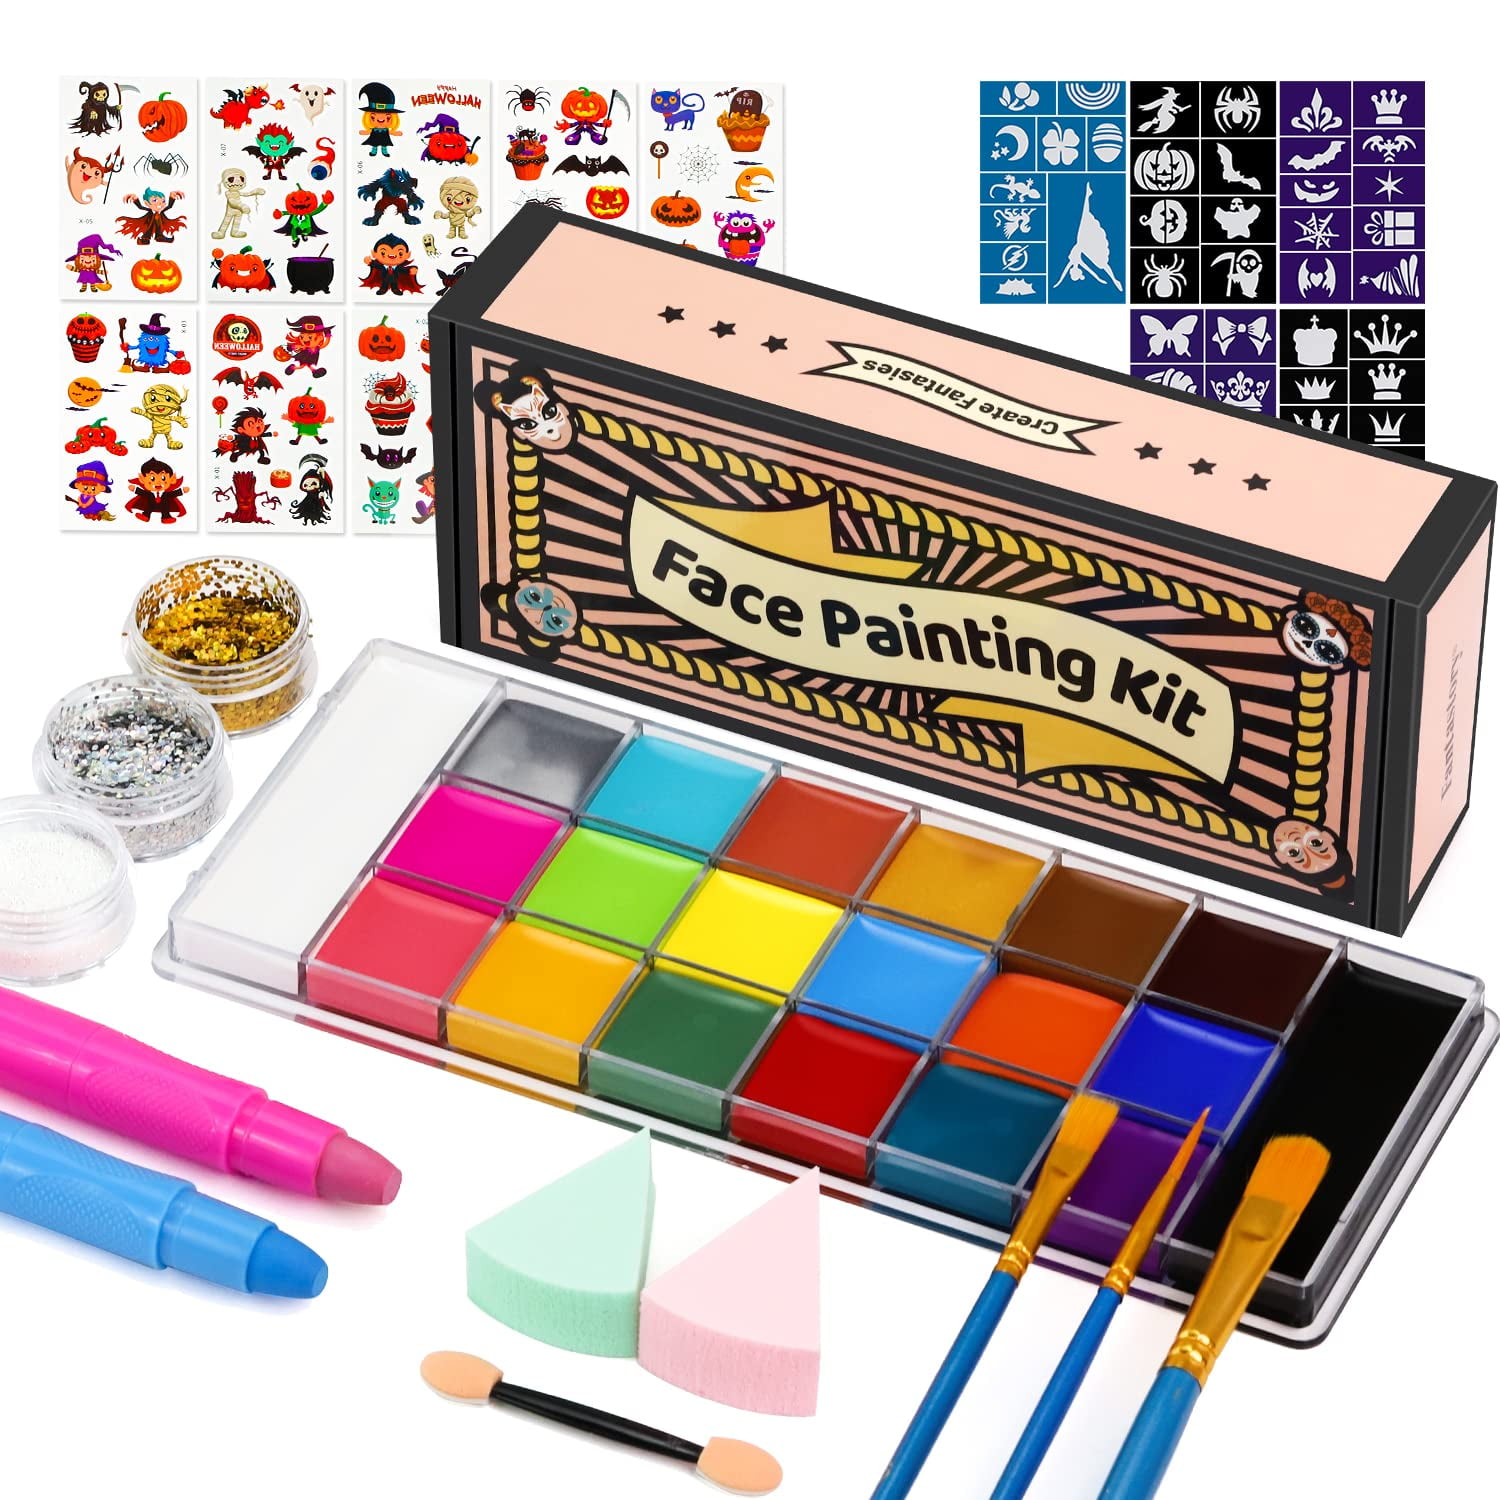 ADIS&GUYS Art Supply Face Painting Kit for Kids Party - 20 Water Based Non-Toxic Sensitive Skin Paints 3 Glitters 2 Hair Chalks Combs 3 Paint Brushes